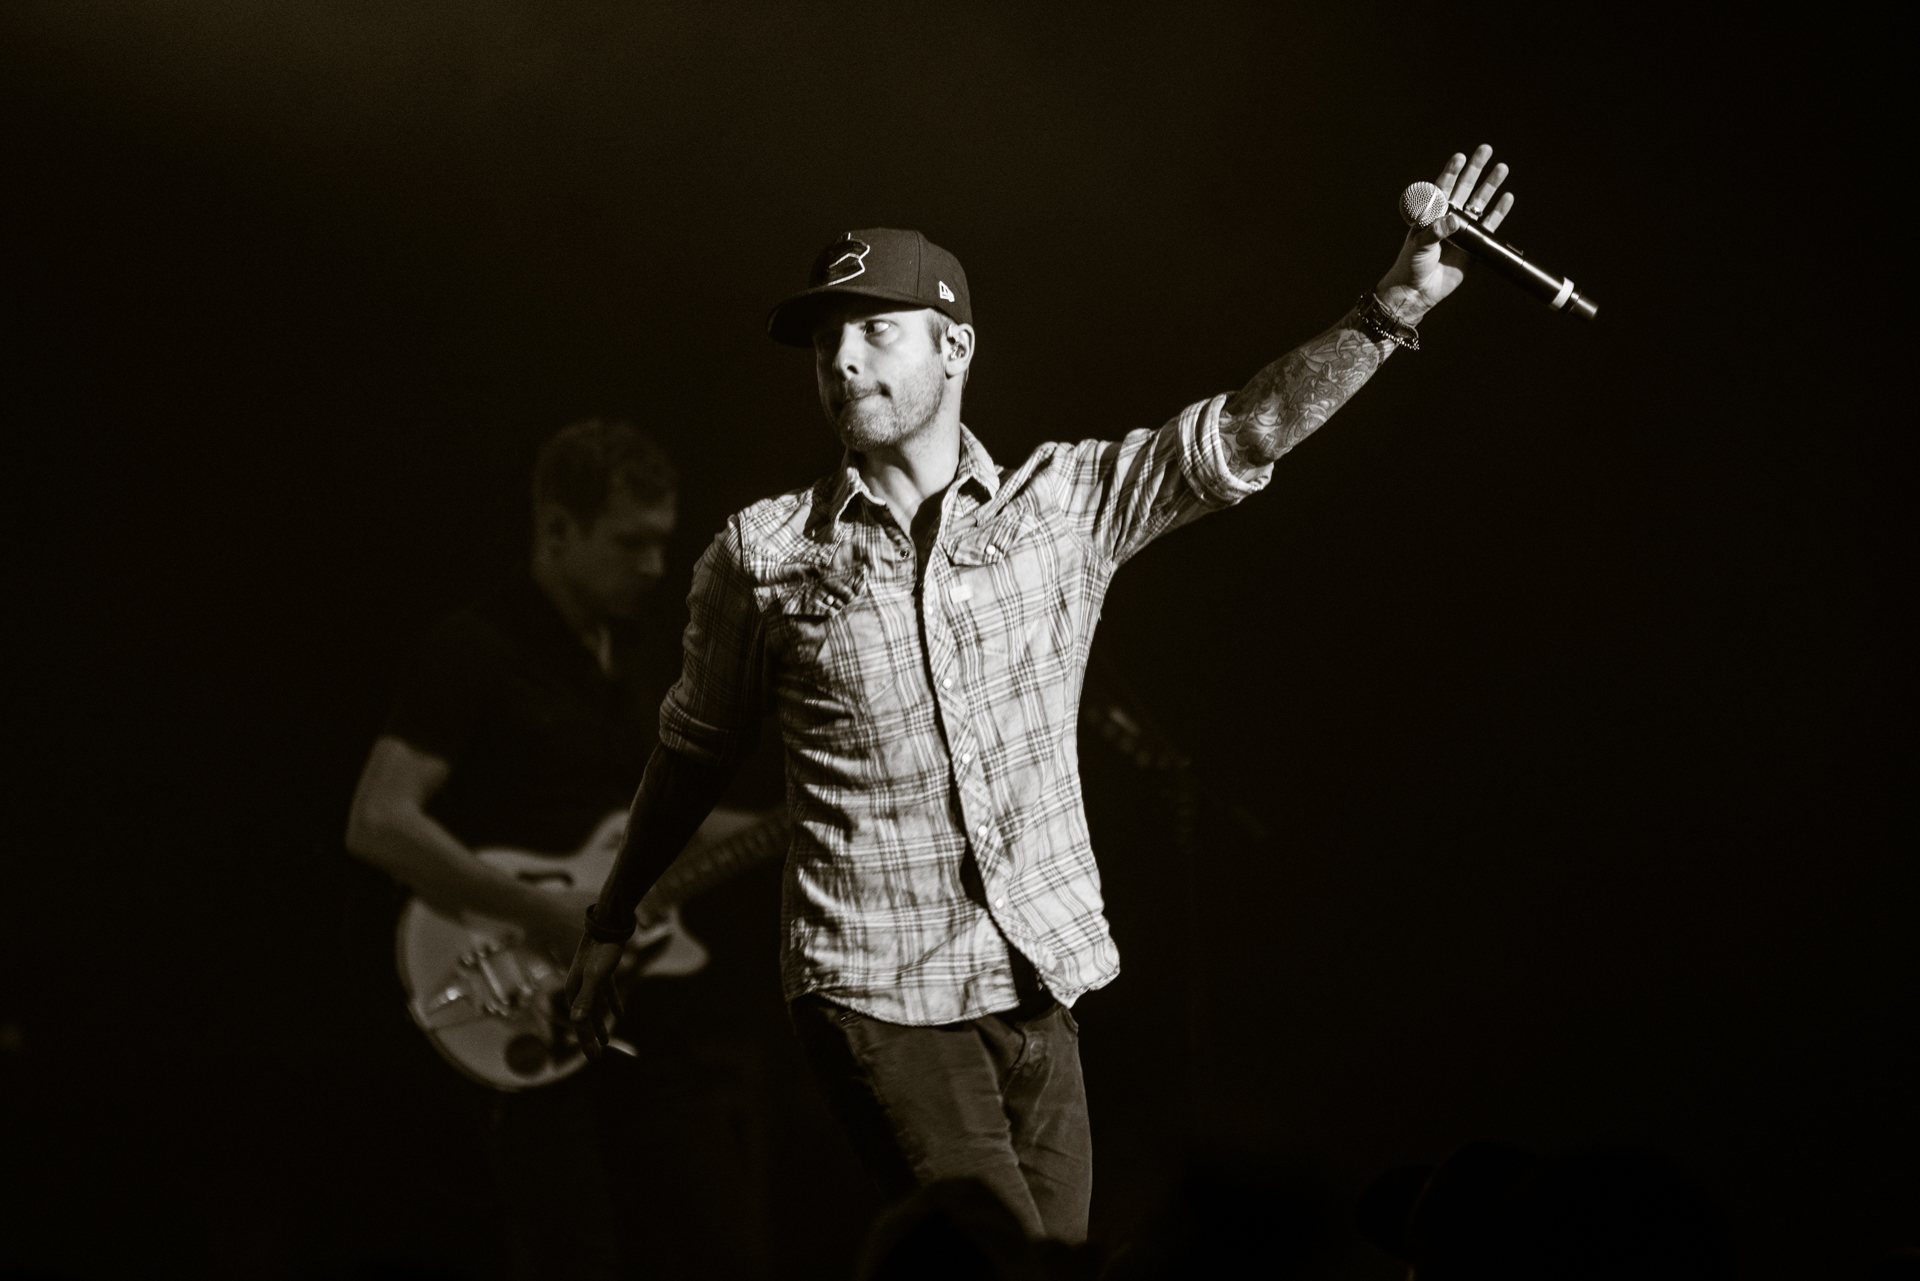 Dallas Smith commands the stage, holding the microphone high in his left hand as he scans the crowd with an electric energy. In the background, a man passionately plays the electric guitar, adding to the intensity of the moment. The black and white photo captures the dynamic and emotive essence of the performance.